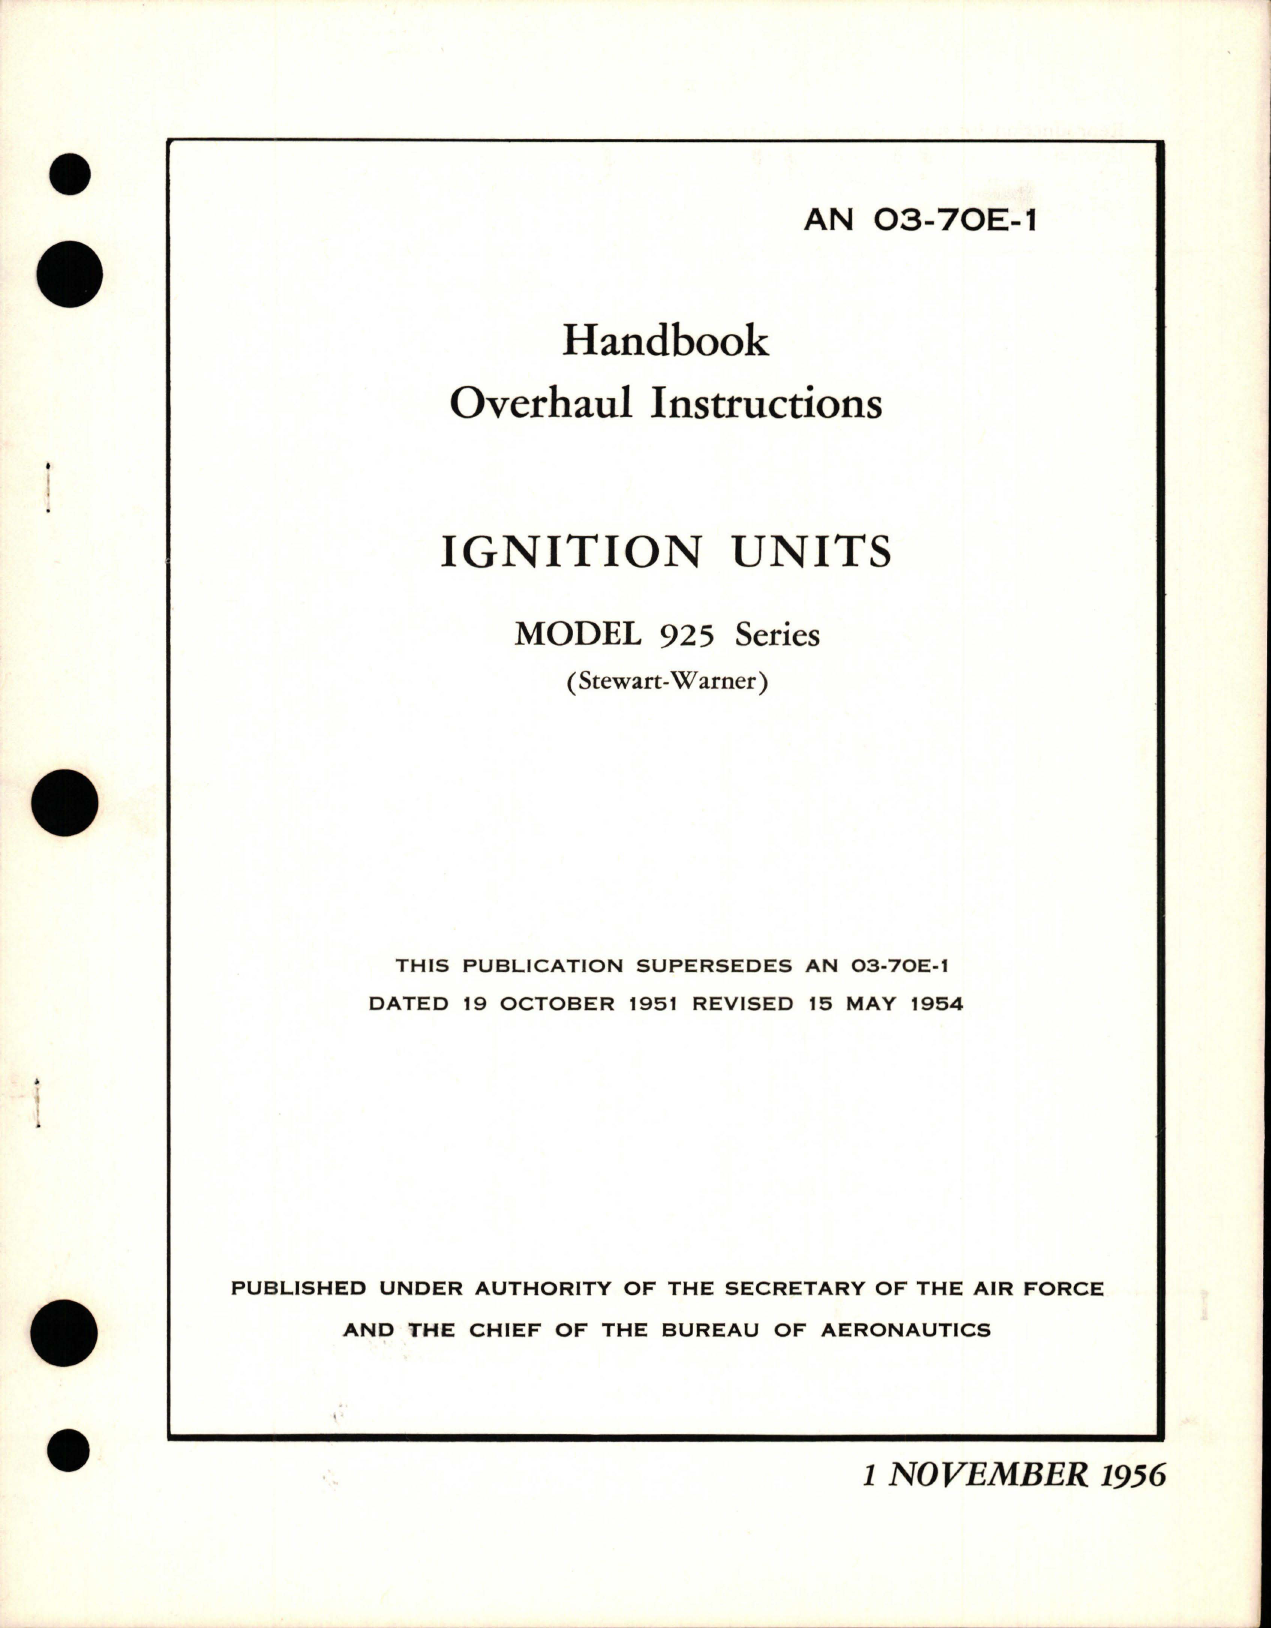 Sample page 1 from AirCorps Library document: Overhaul Instructions for Ignition Units - Model 925 Series